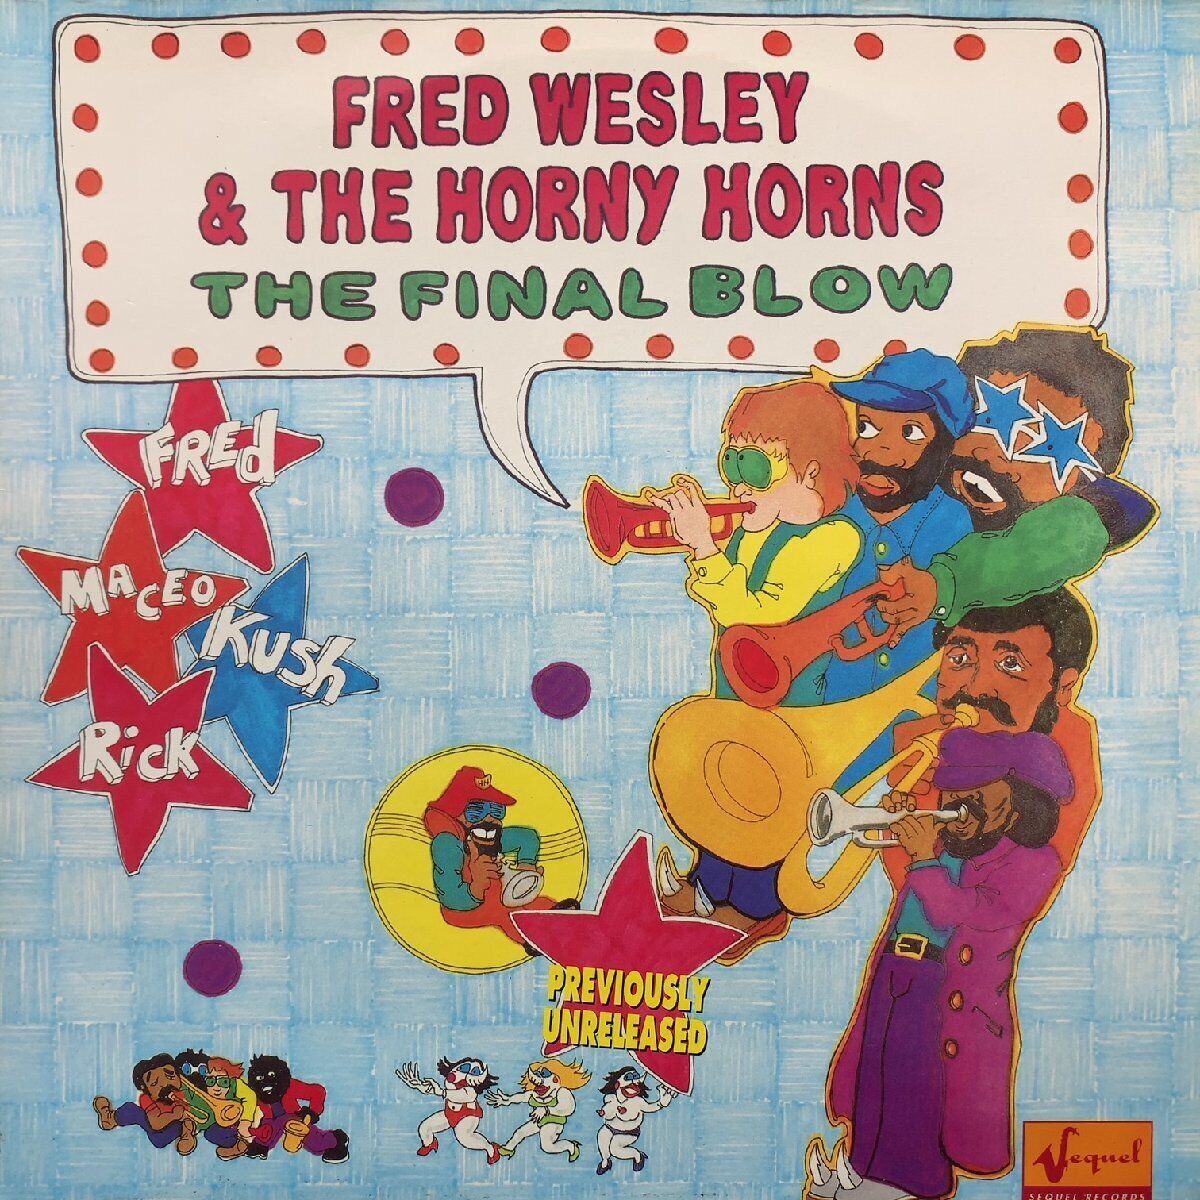 Fred Wesley The Horny Horns / Final Blow 2Lp Vinyl Record Analog